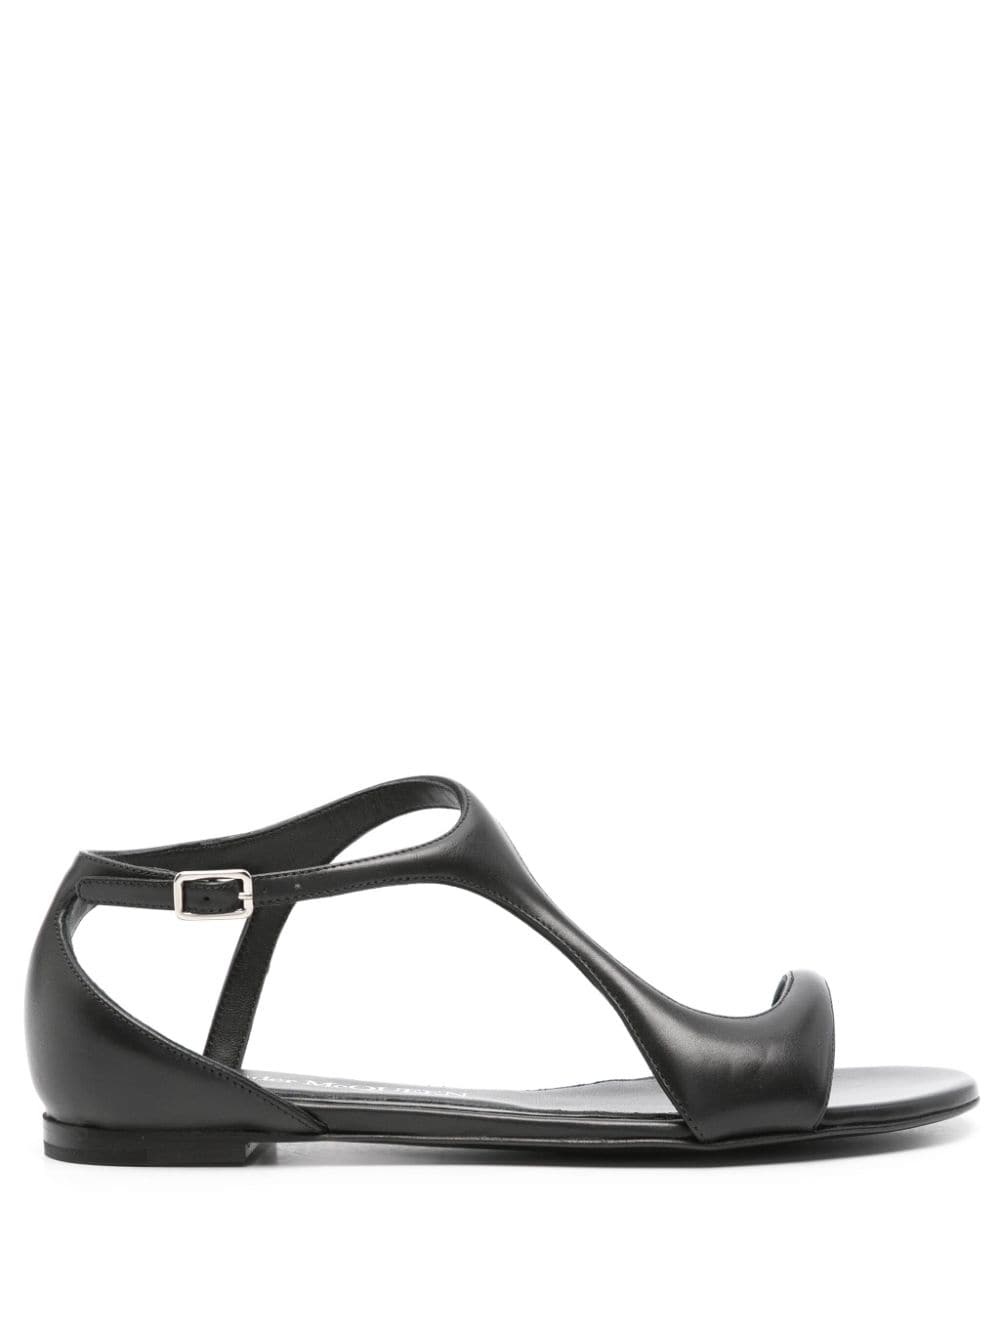 leather flat sandals - 1